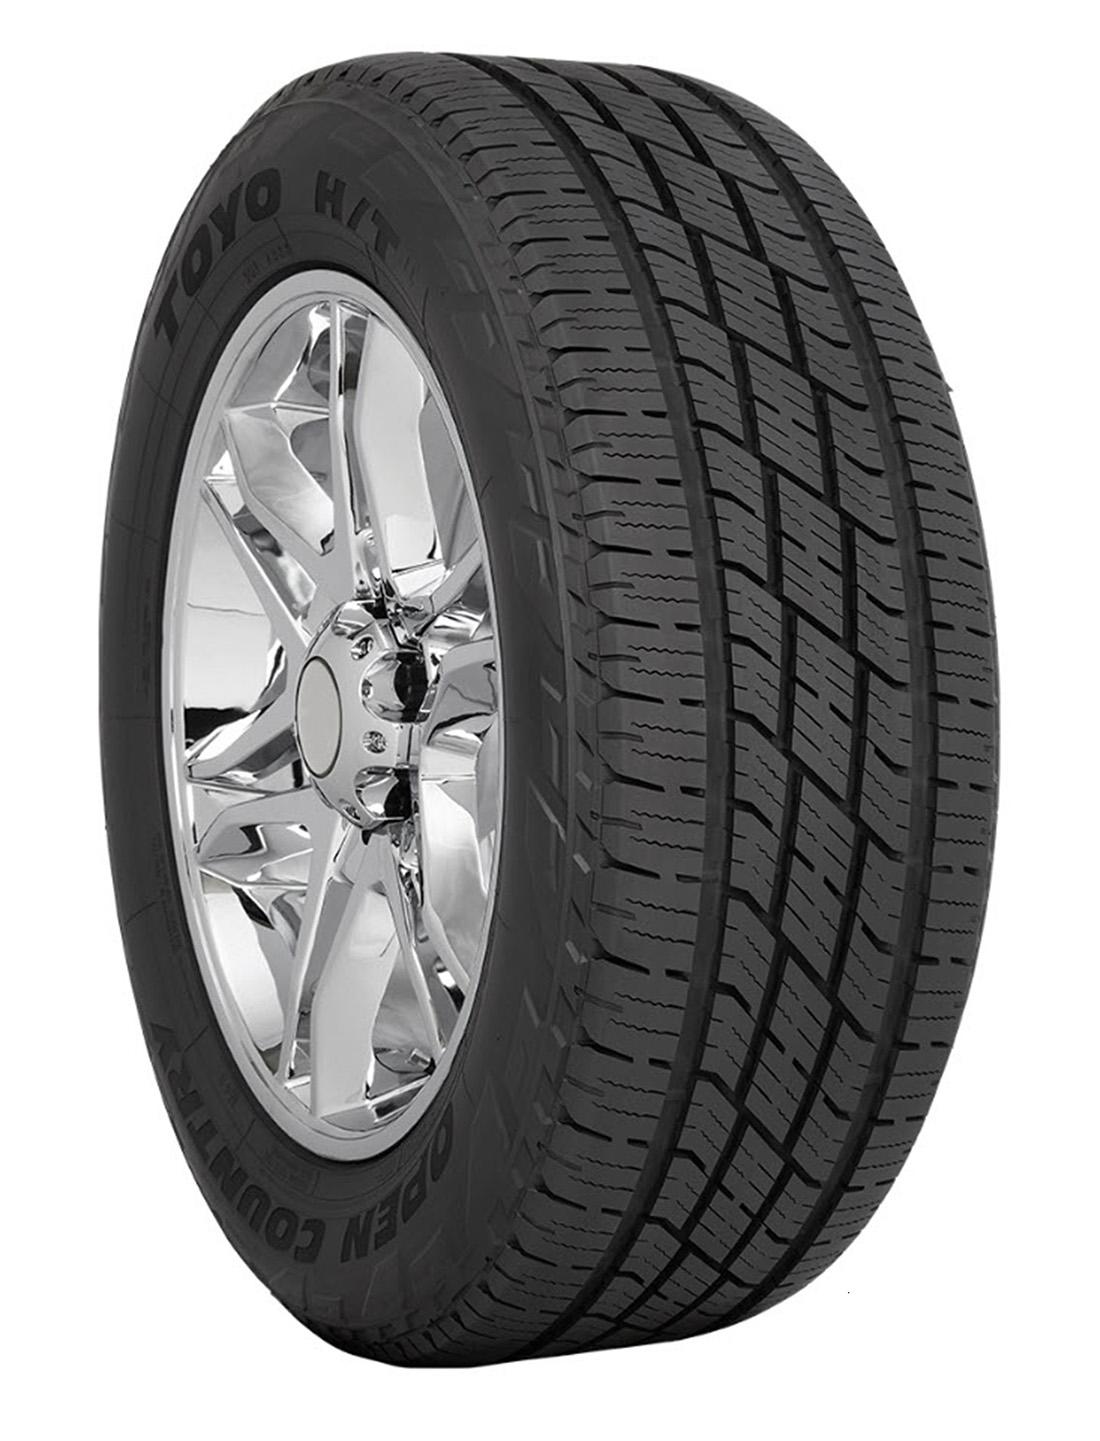 Toyo - PROXES HT  NW  285/40R22